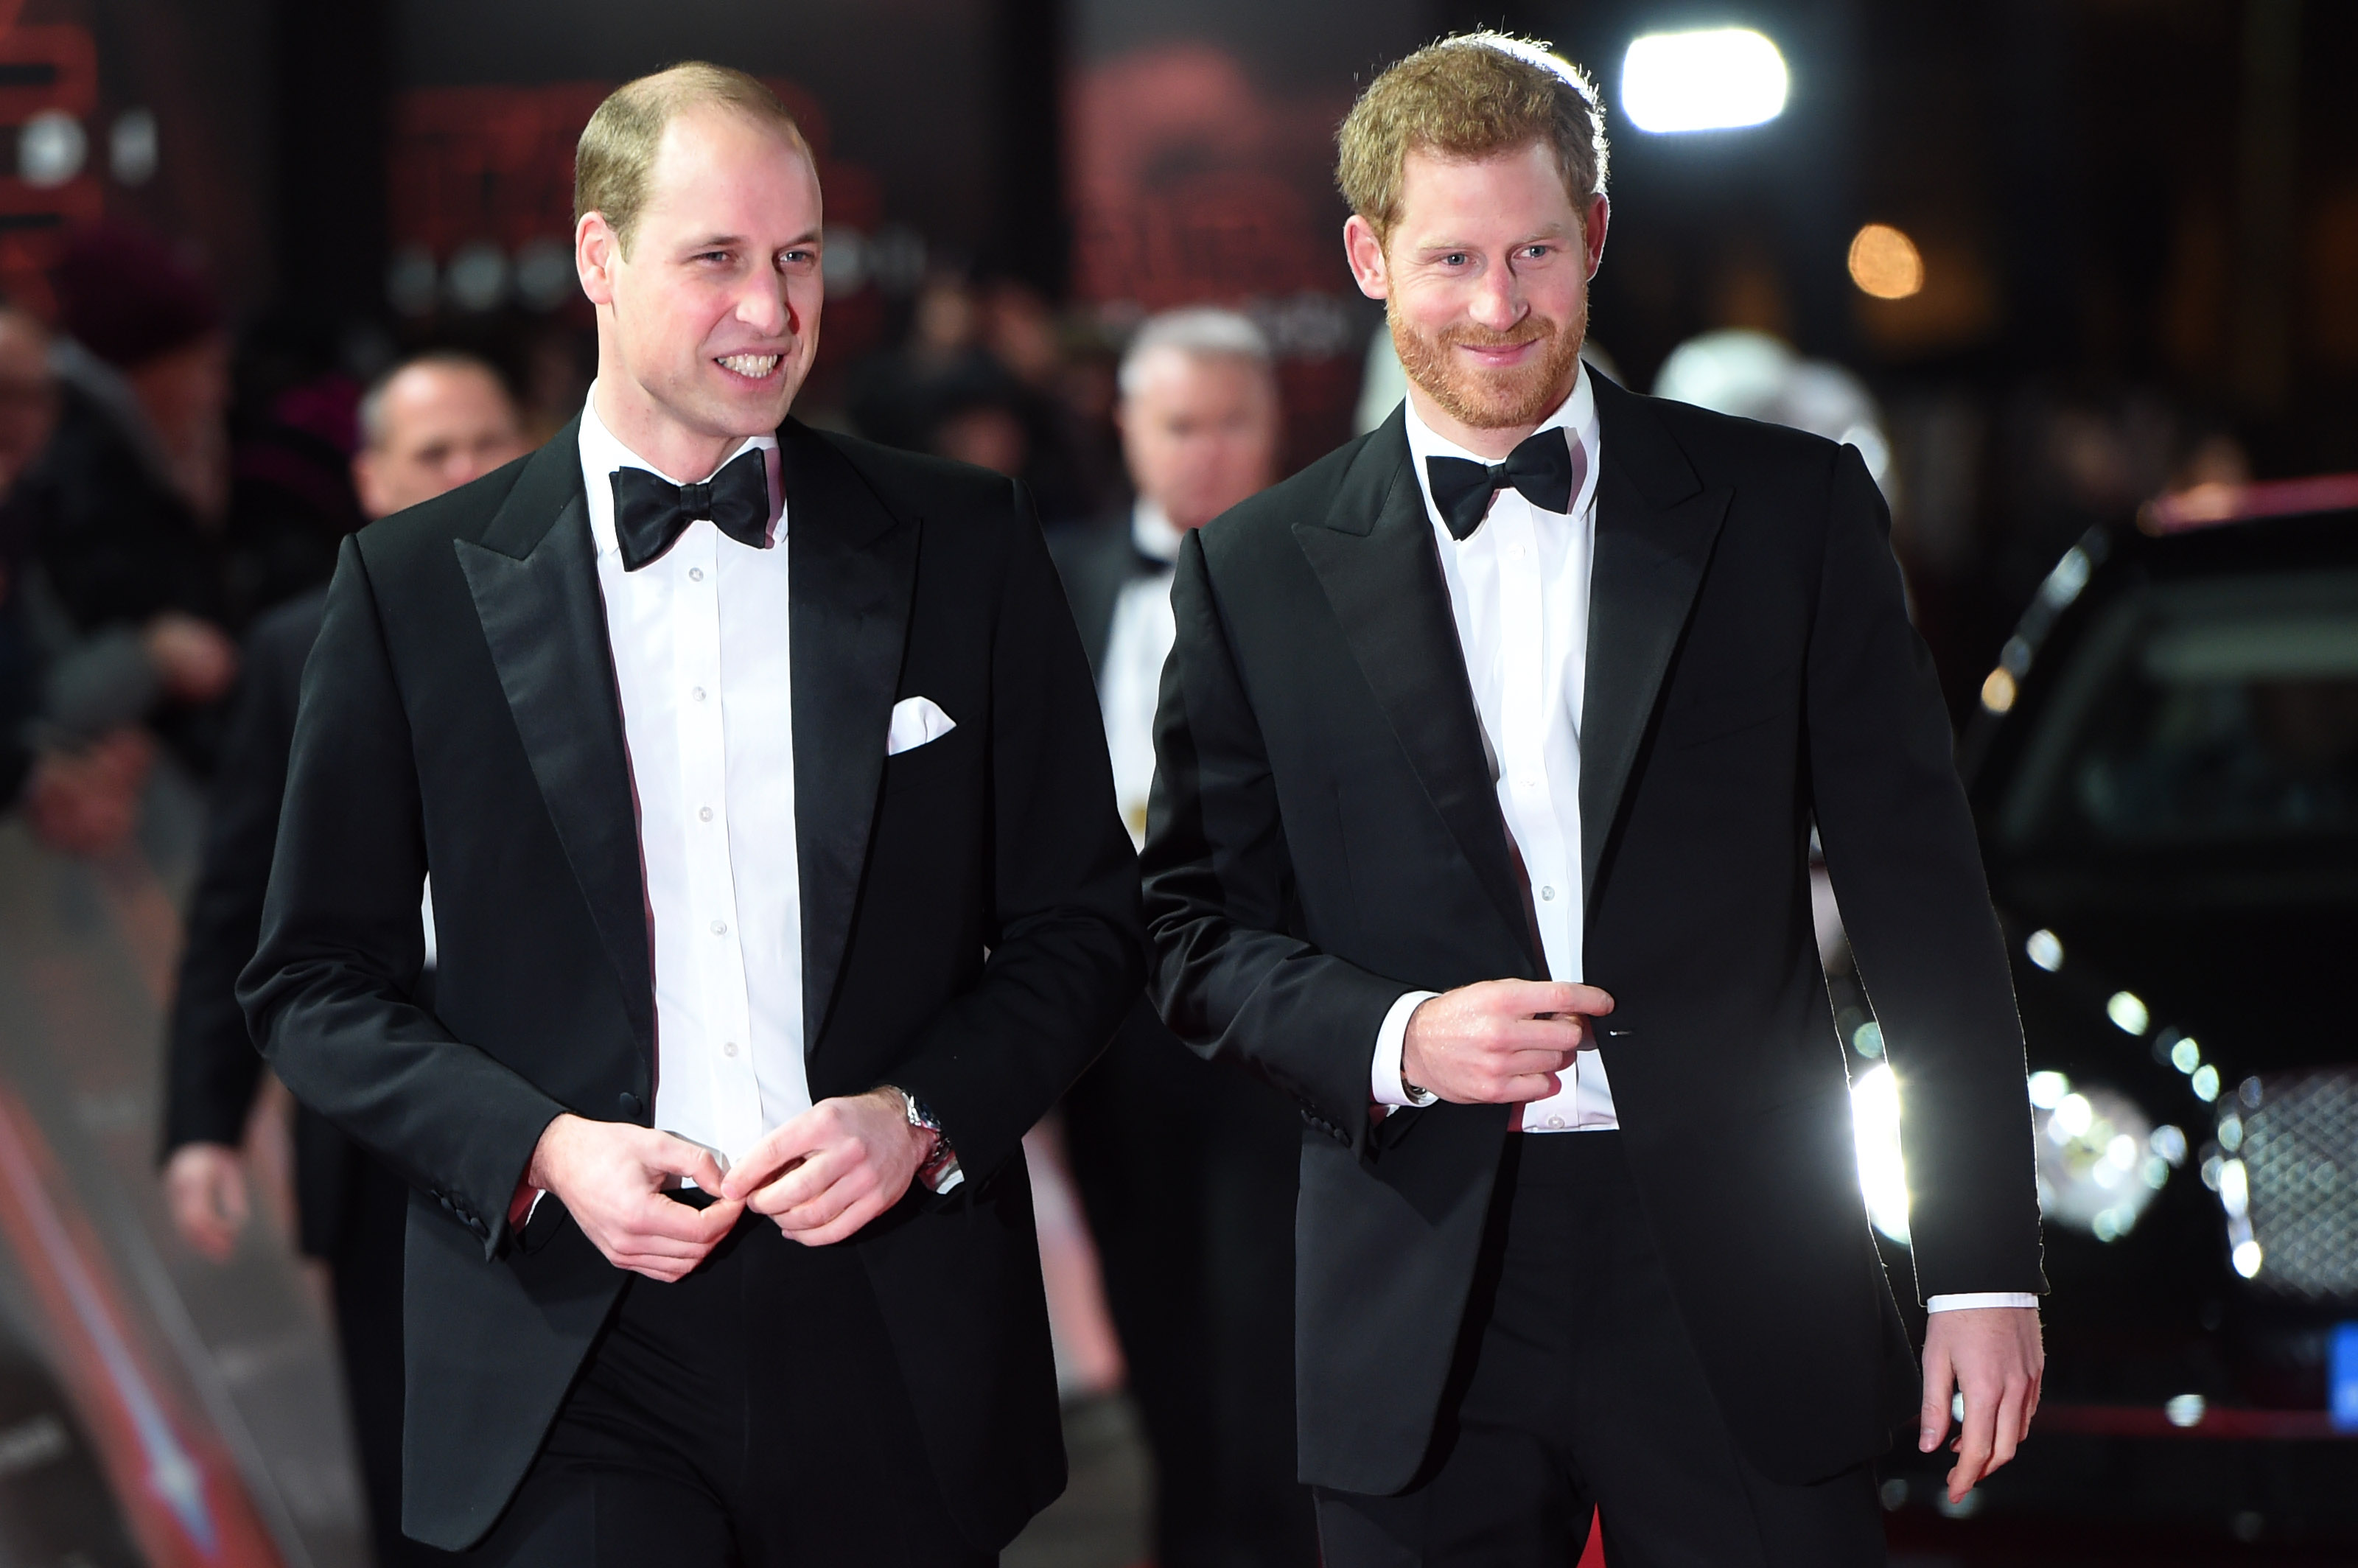 Prince William and Prince Harry attend the "Star Wars: The Last Jedi" premiere on on December 12, 2017 in London, England | Source: Getty Images